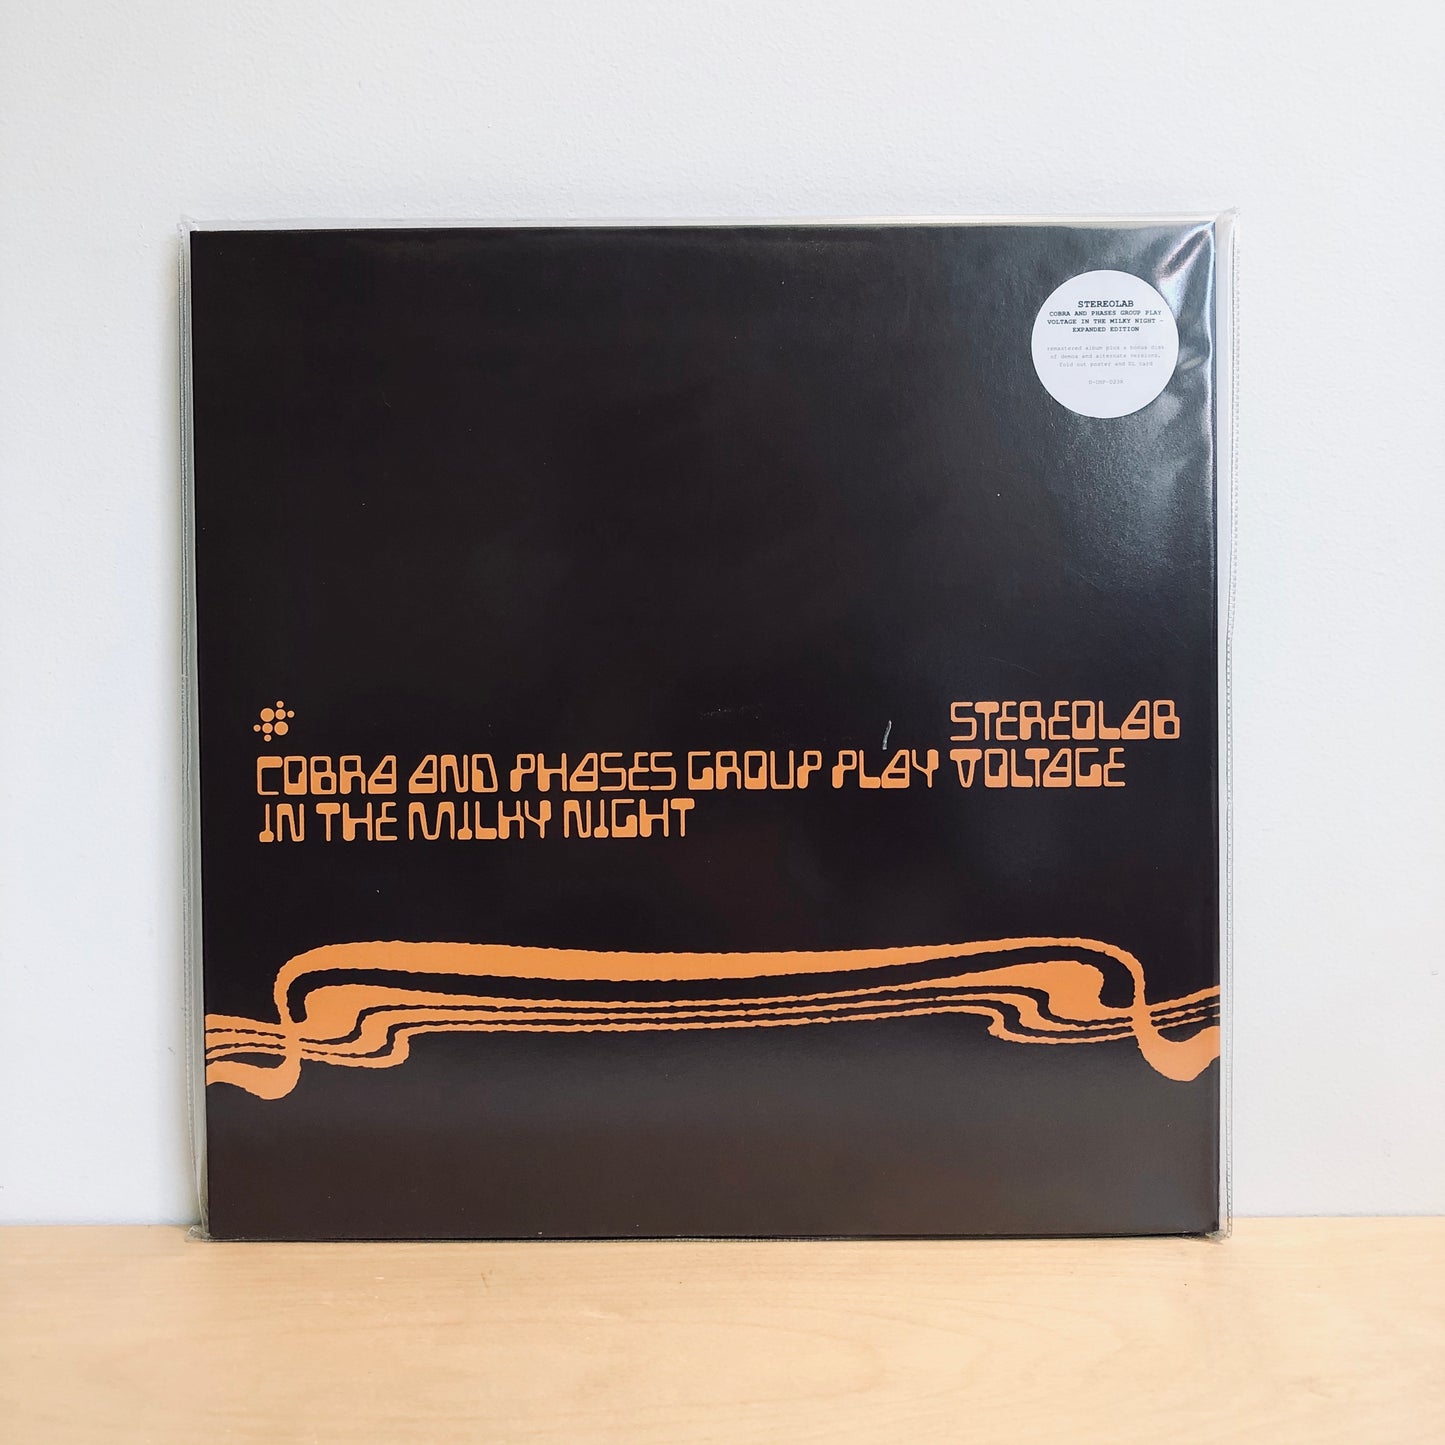 Stereolab - Cobra and Phases Group Plays Voltage In The Milky Night. 3LP